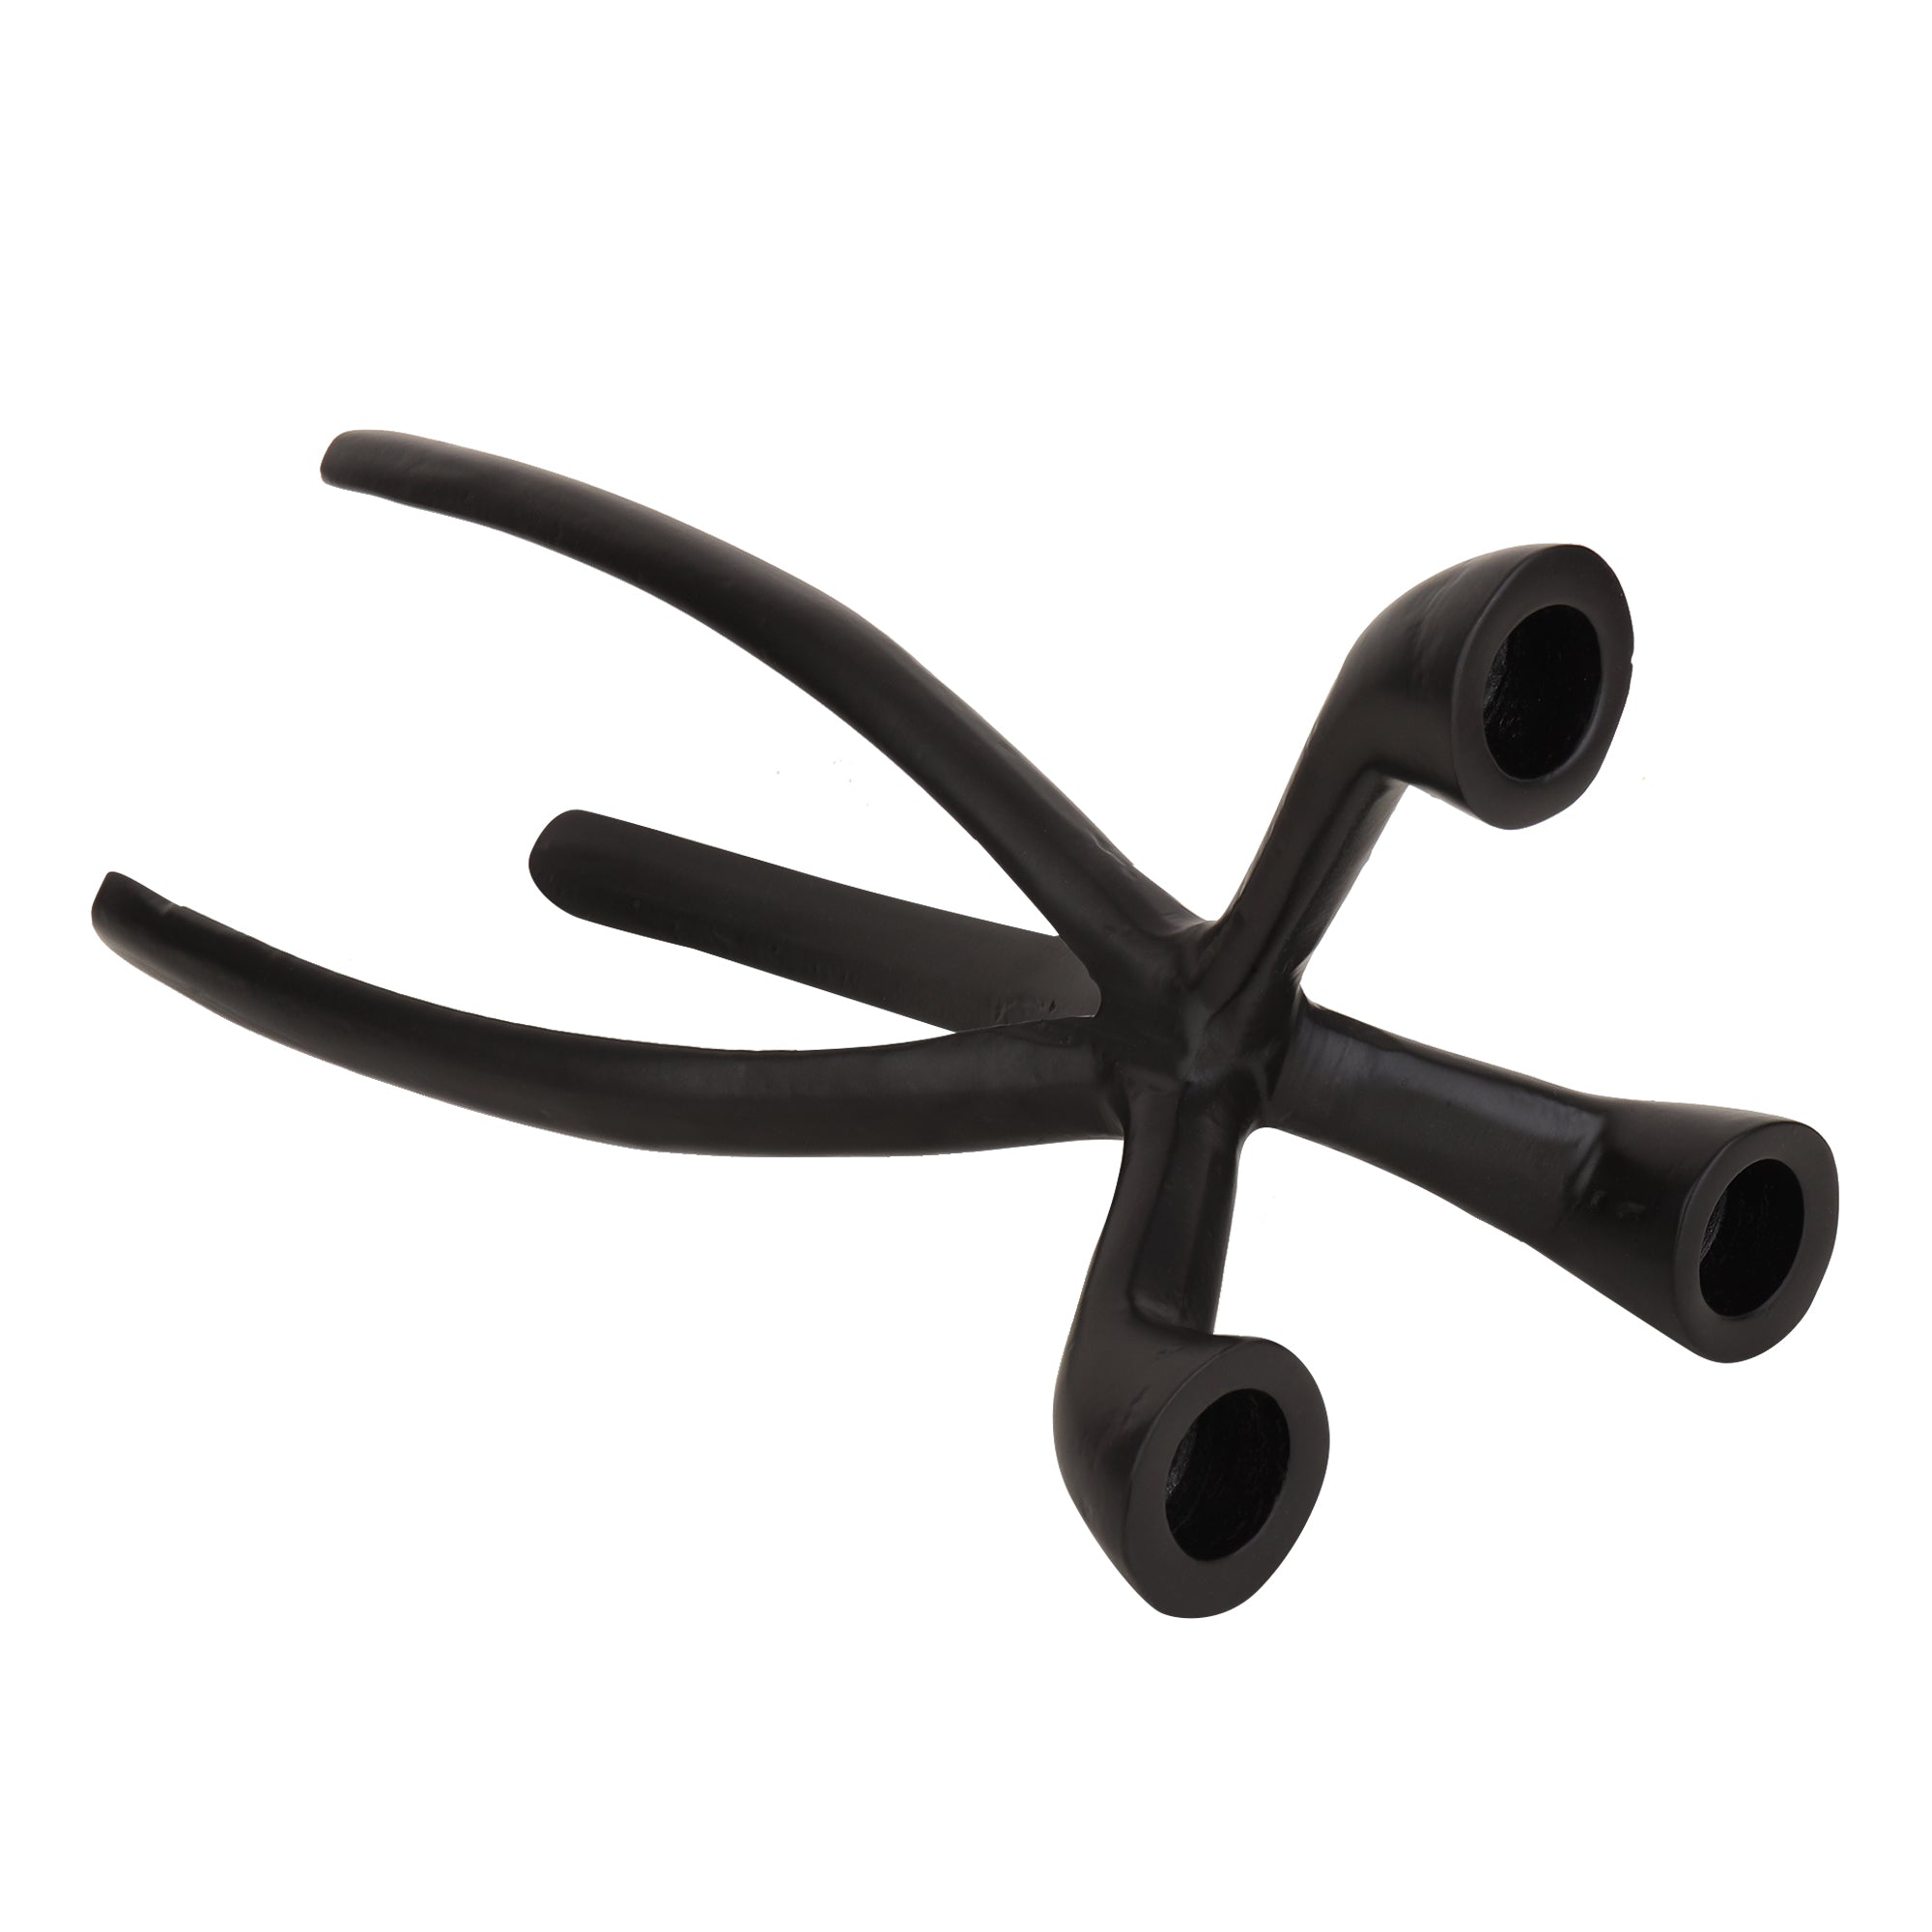 Trifecta Candle Holder in Black